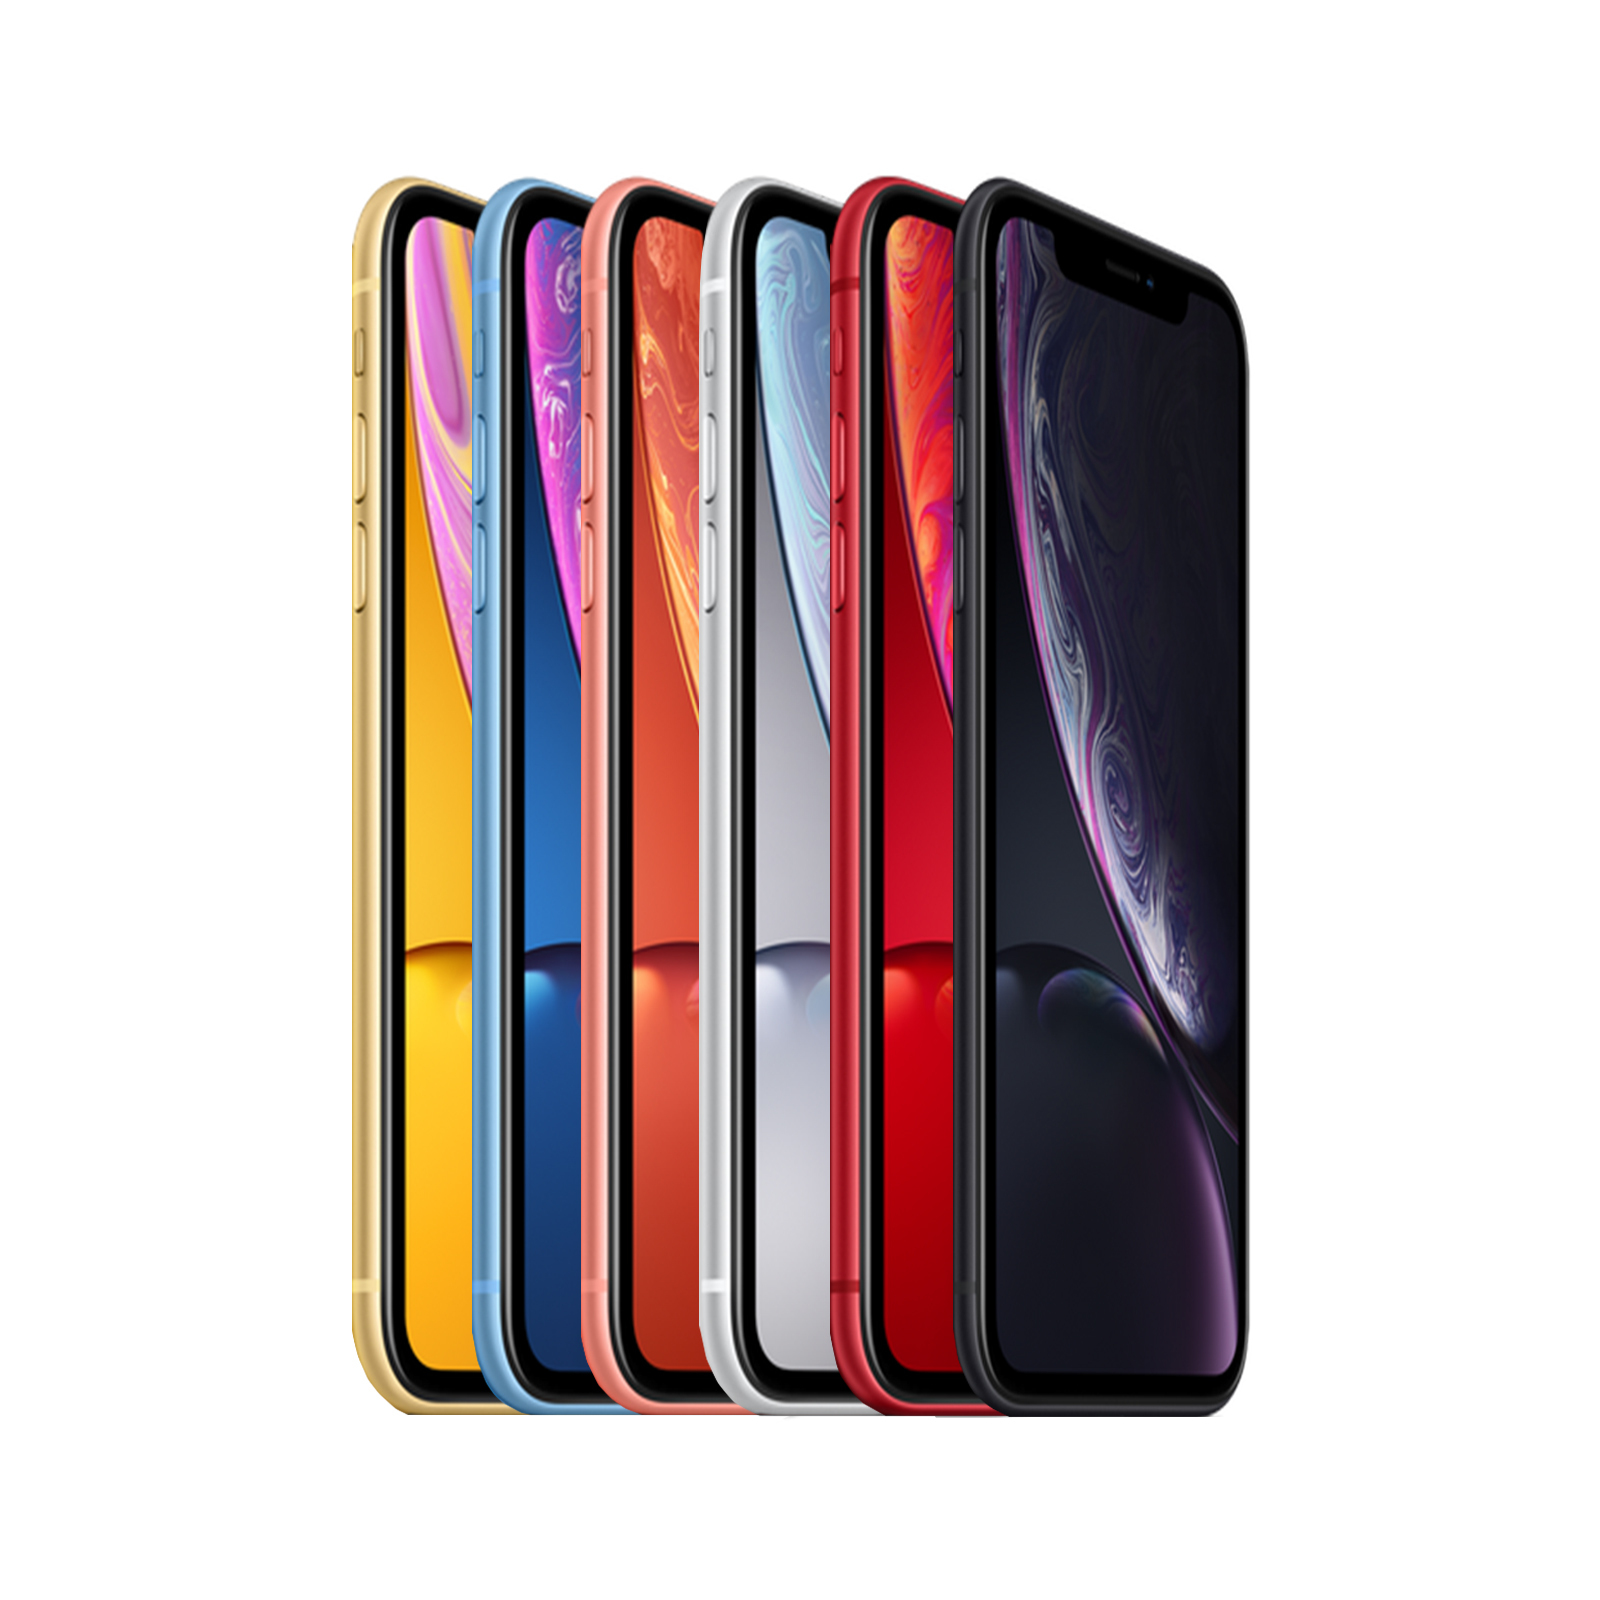 Apple iPhone XR    GB Black Yellow Blue Coral White